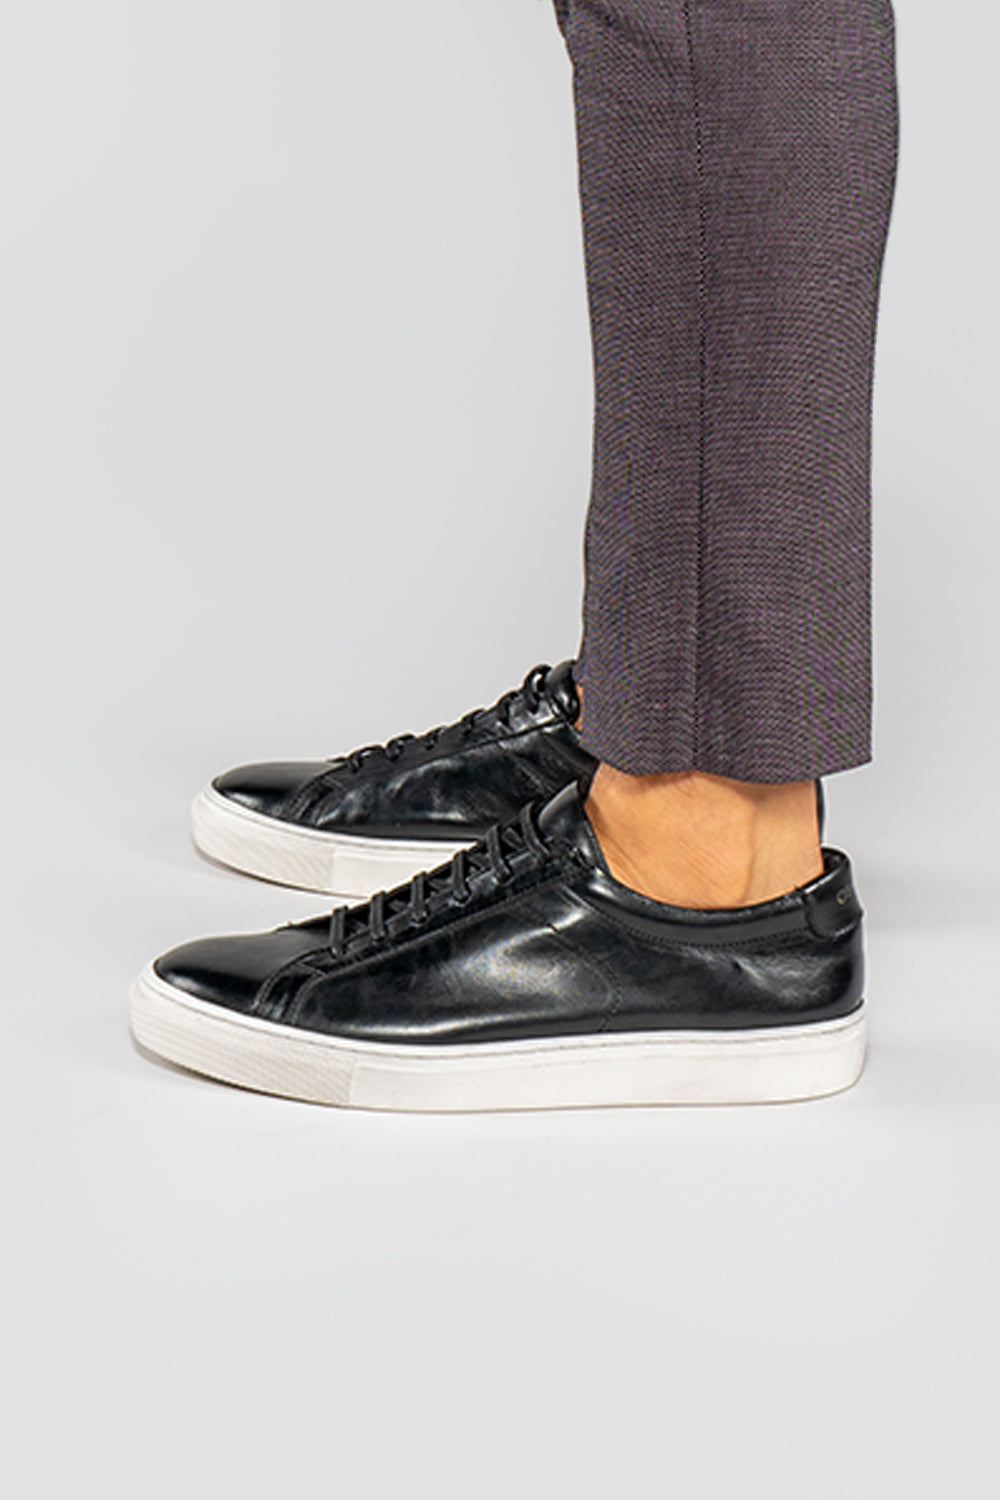 model wearing Men's black leather trainers with white sole